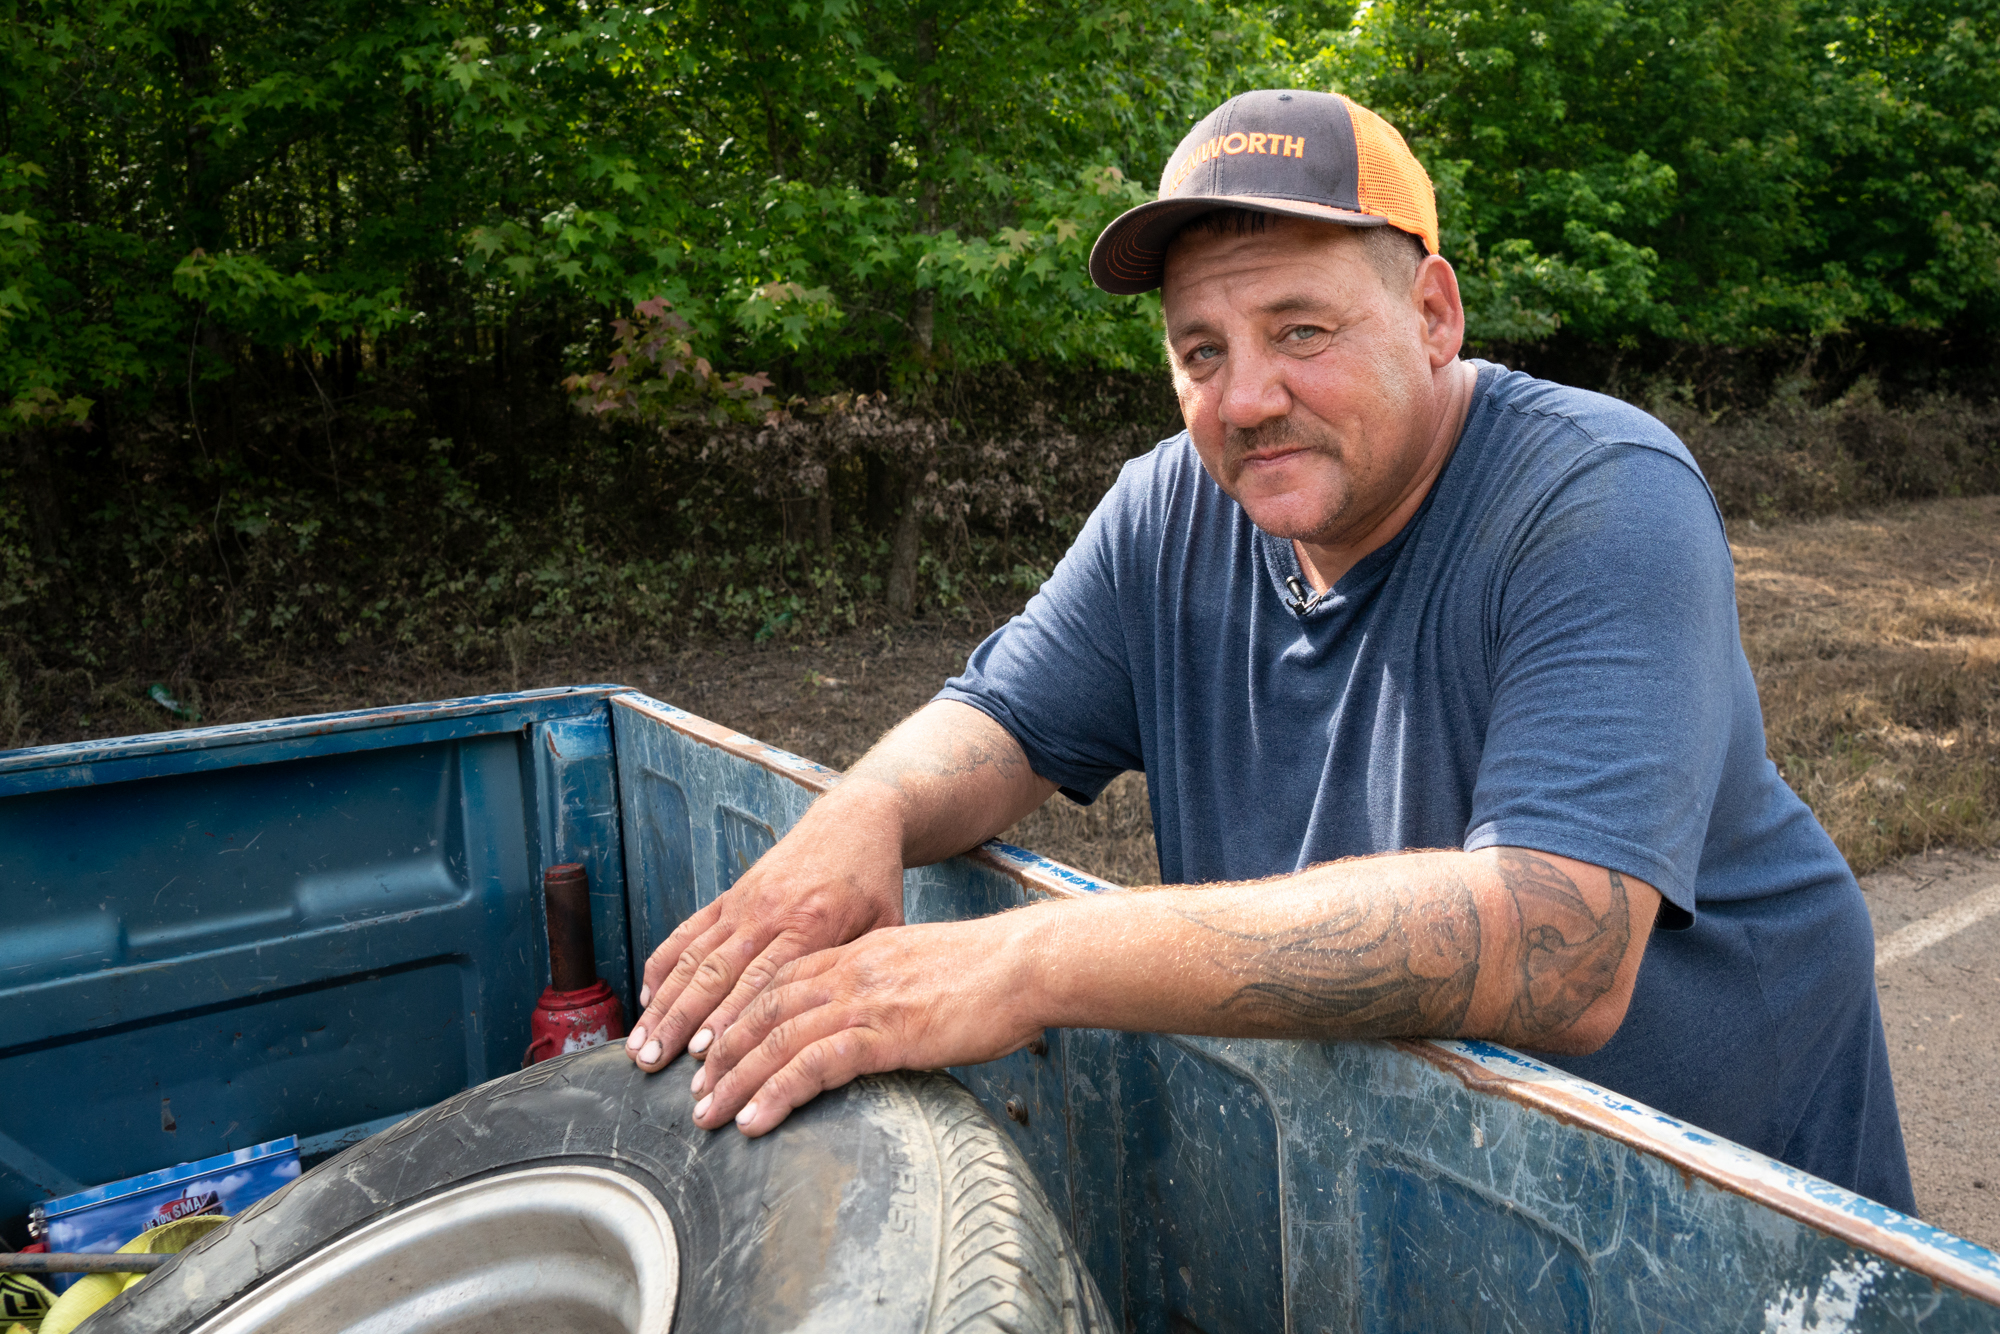 John Hammons - John Hammons, of Mayflower, Arkansas, has lived through five disasters, including the 2013 Mayflower oil spill, an EF4 tornado in 2014 and flooding from the Arkansas River in 2015, 2016 and again in 2019. (Jordan Laird/News21)